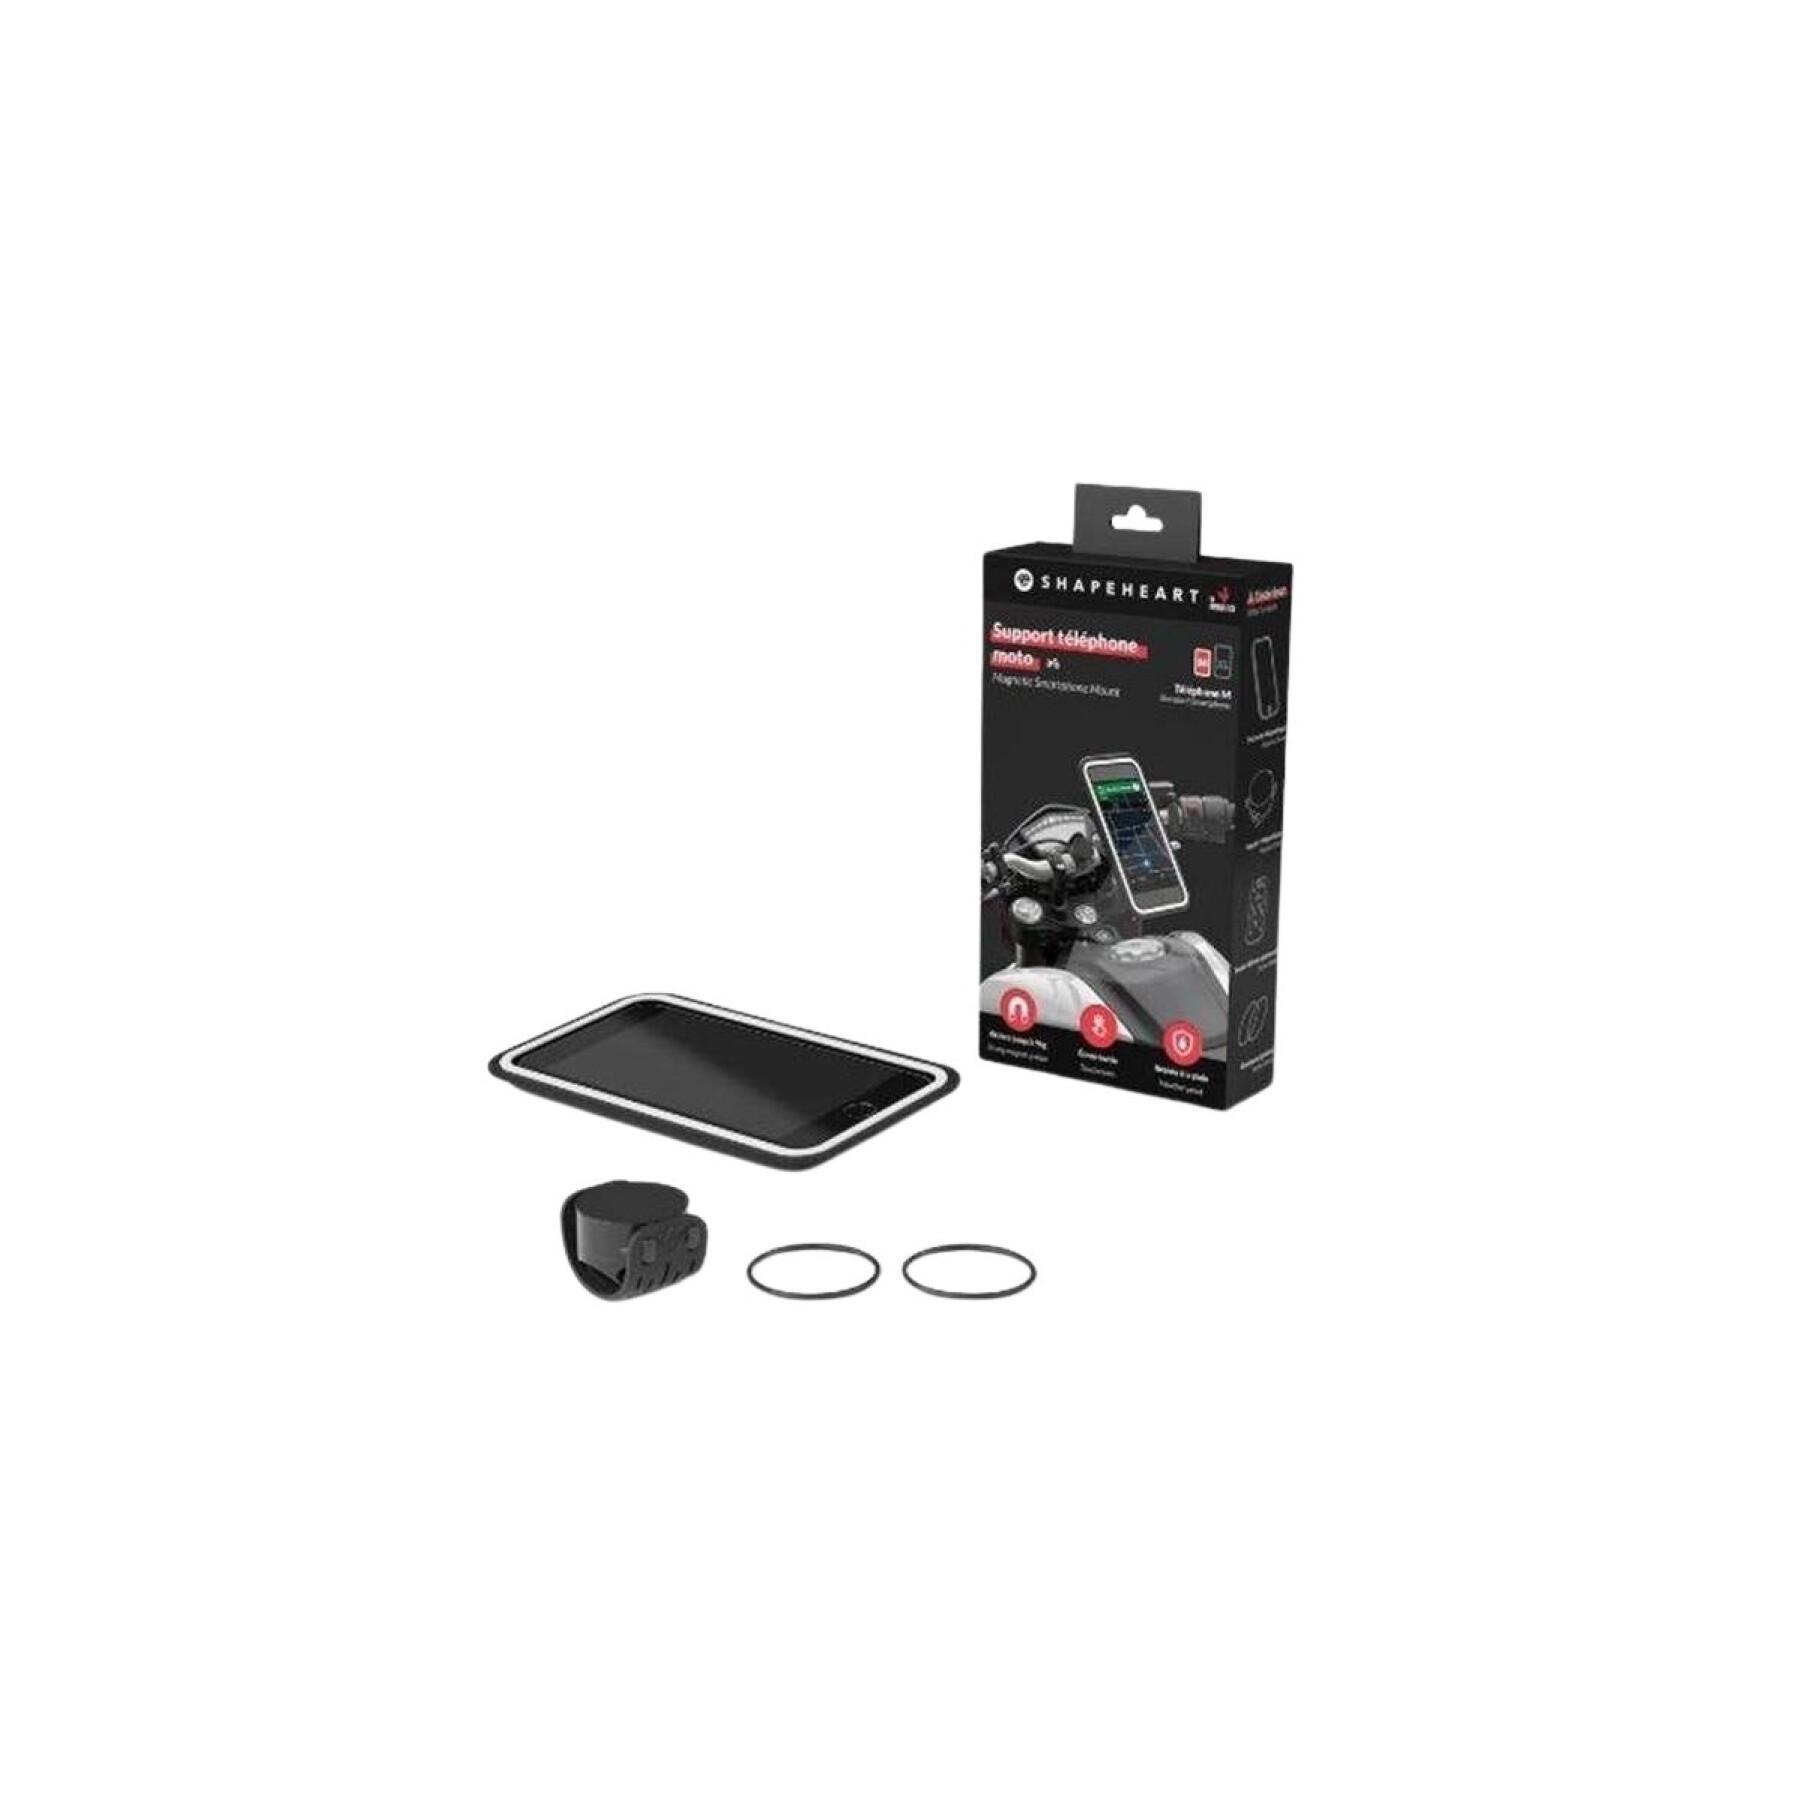 Support smartphone moto magnétique Shapeheart